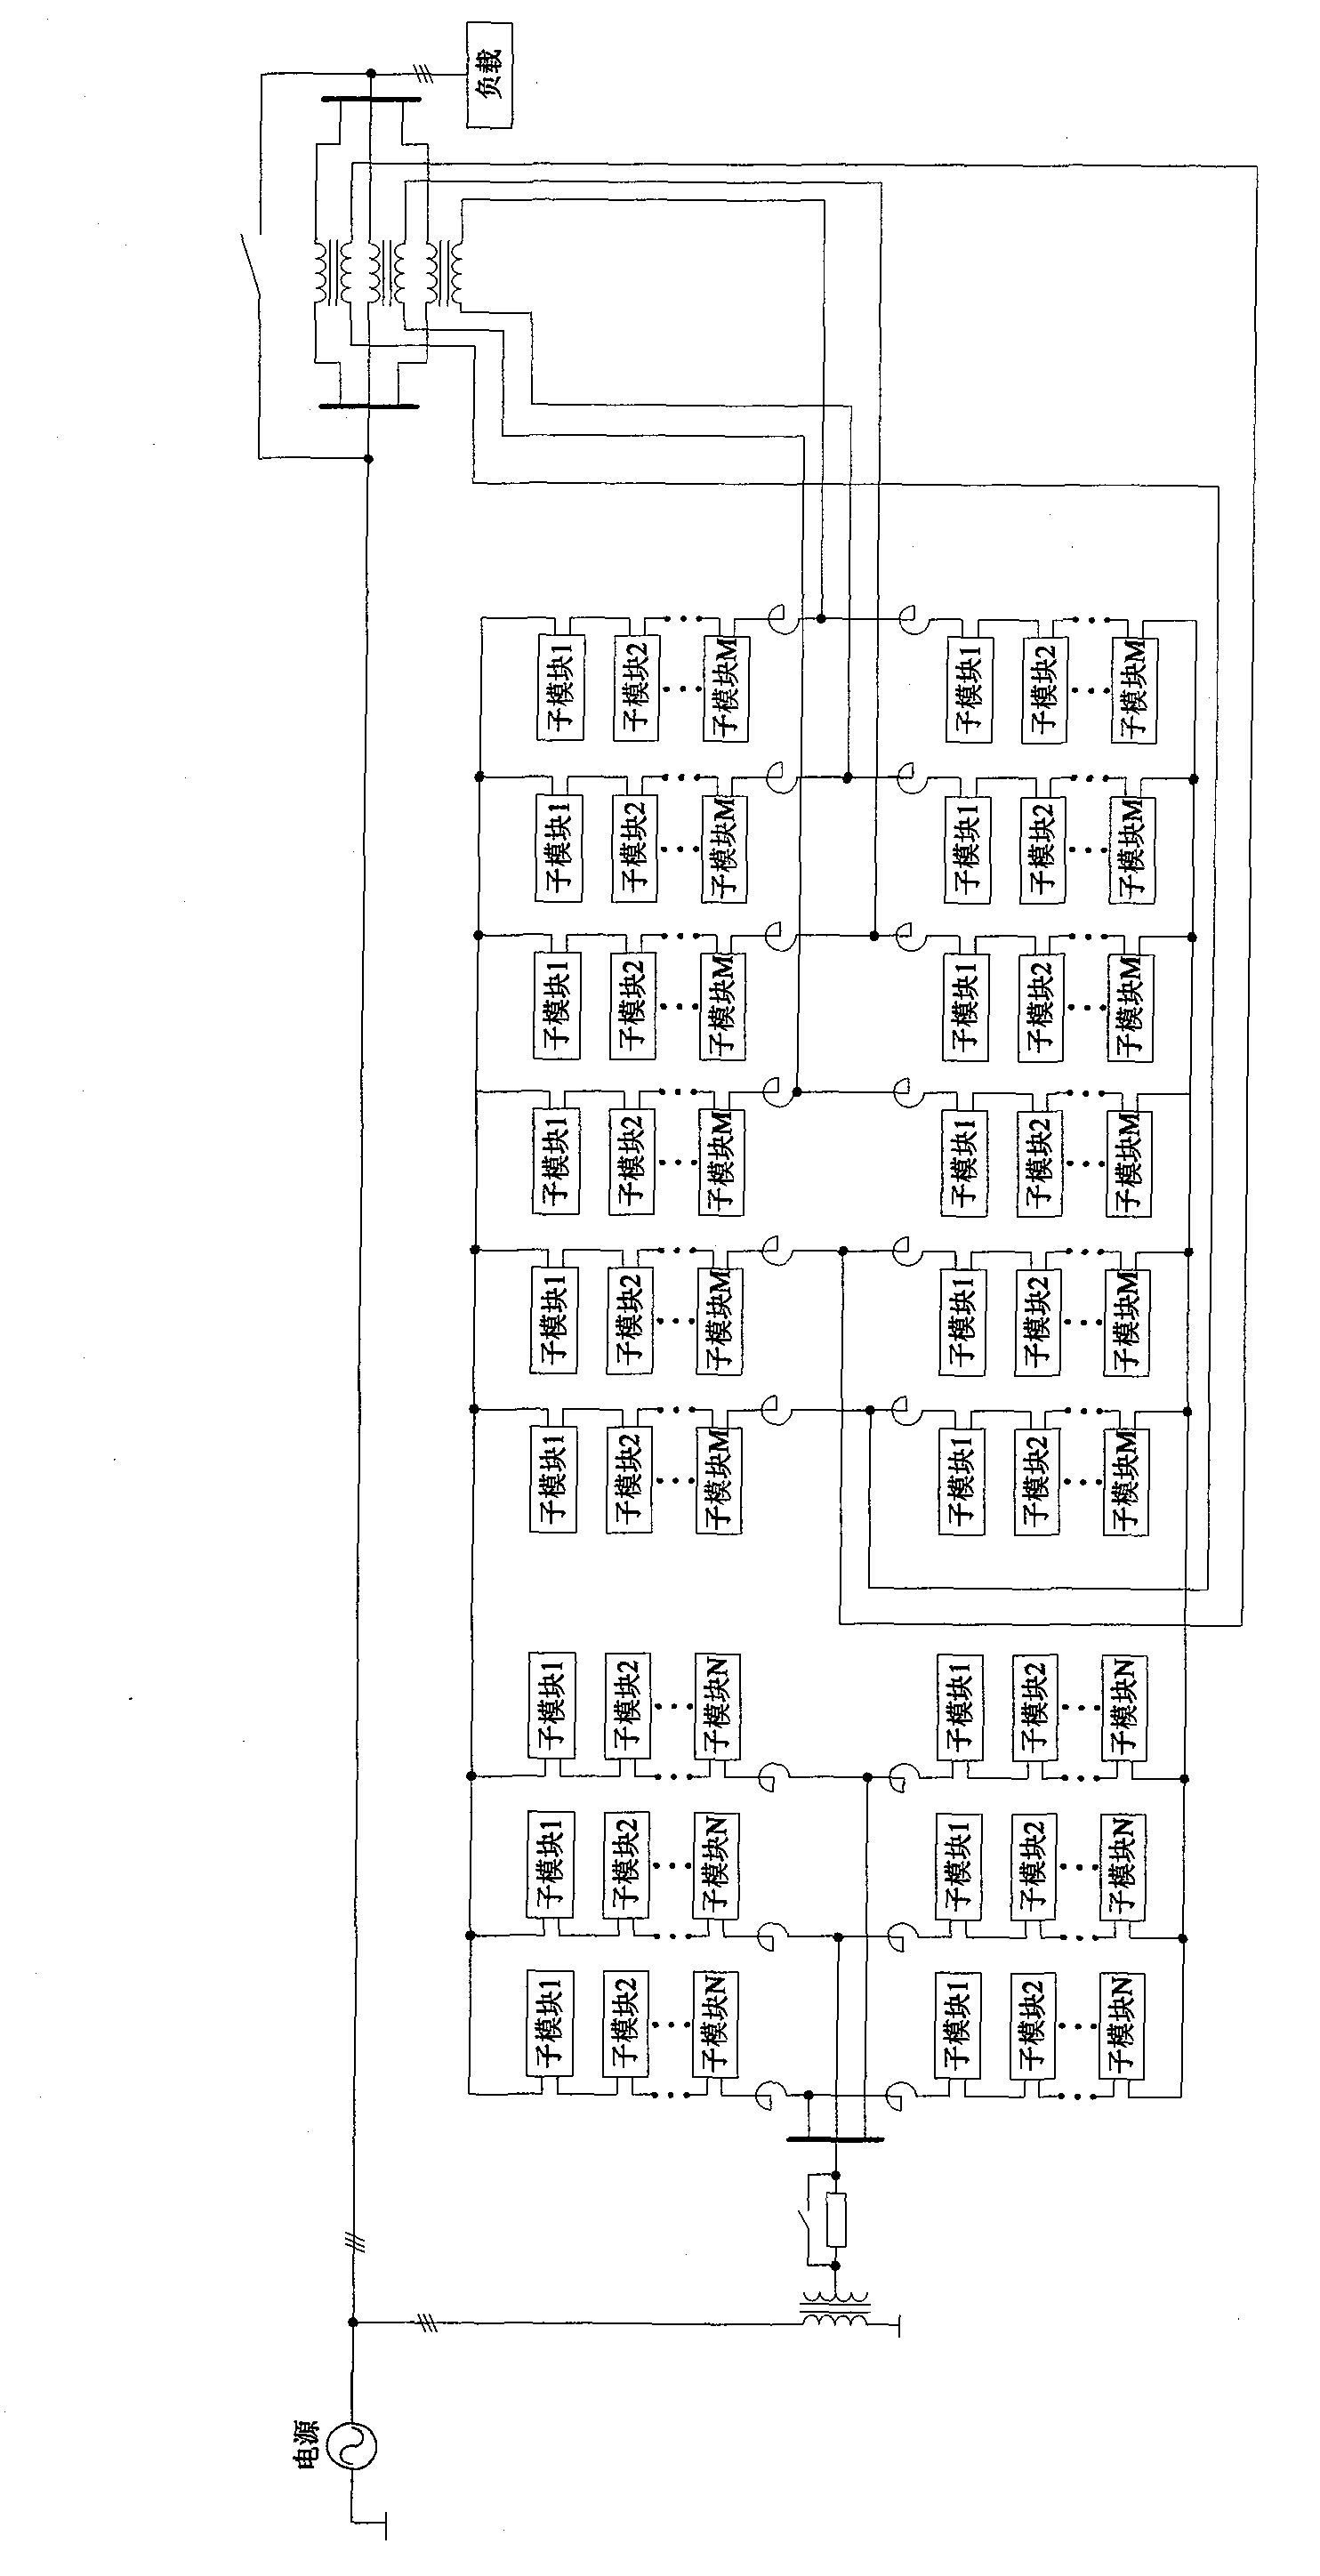 Unified power flow controller used for unbalanced system